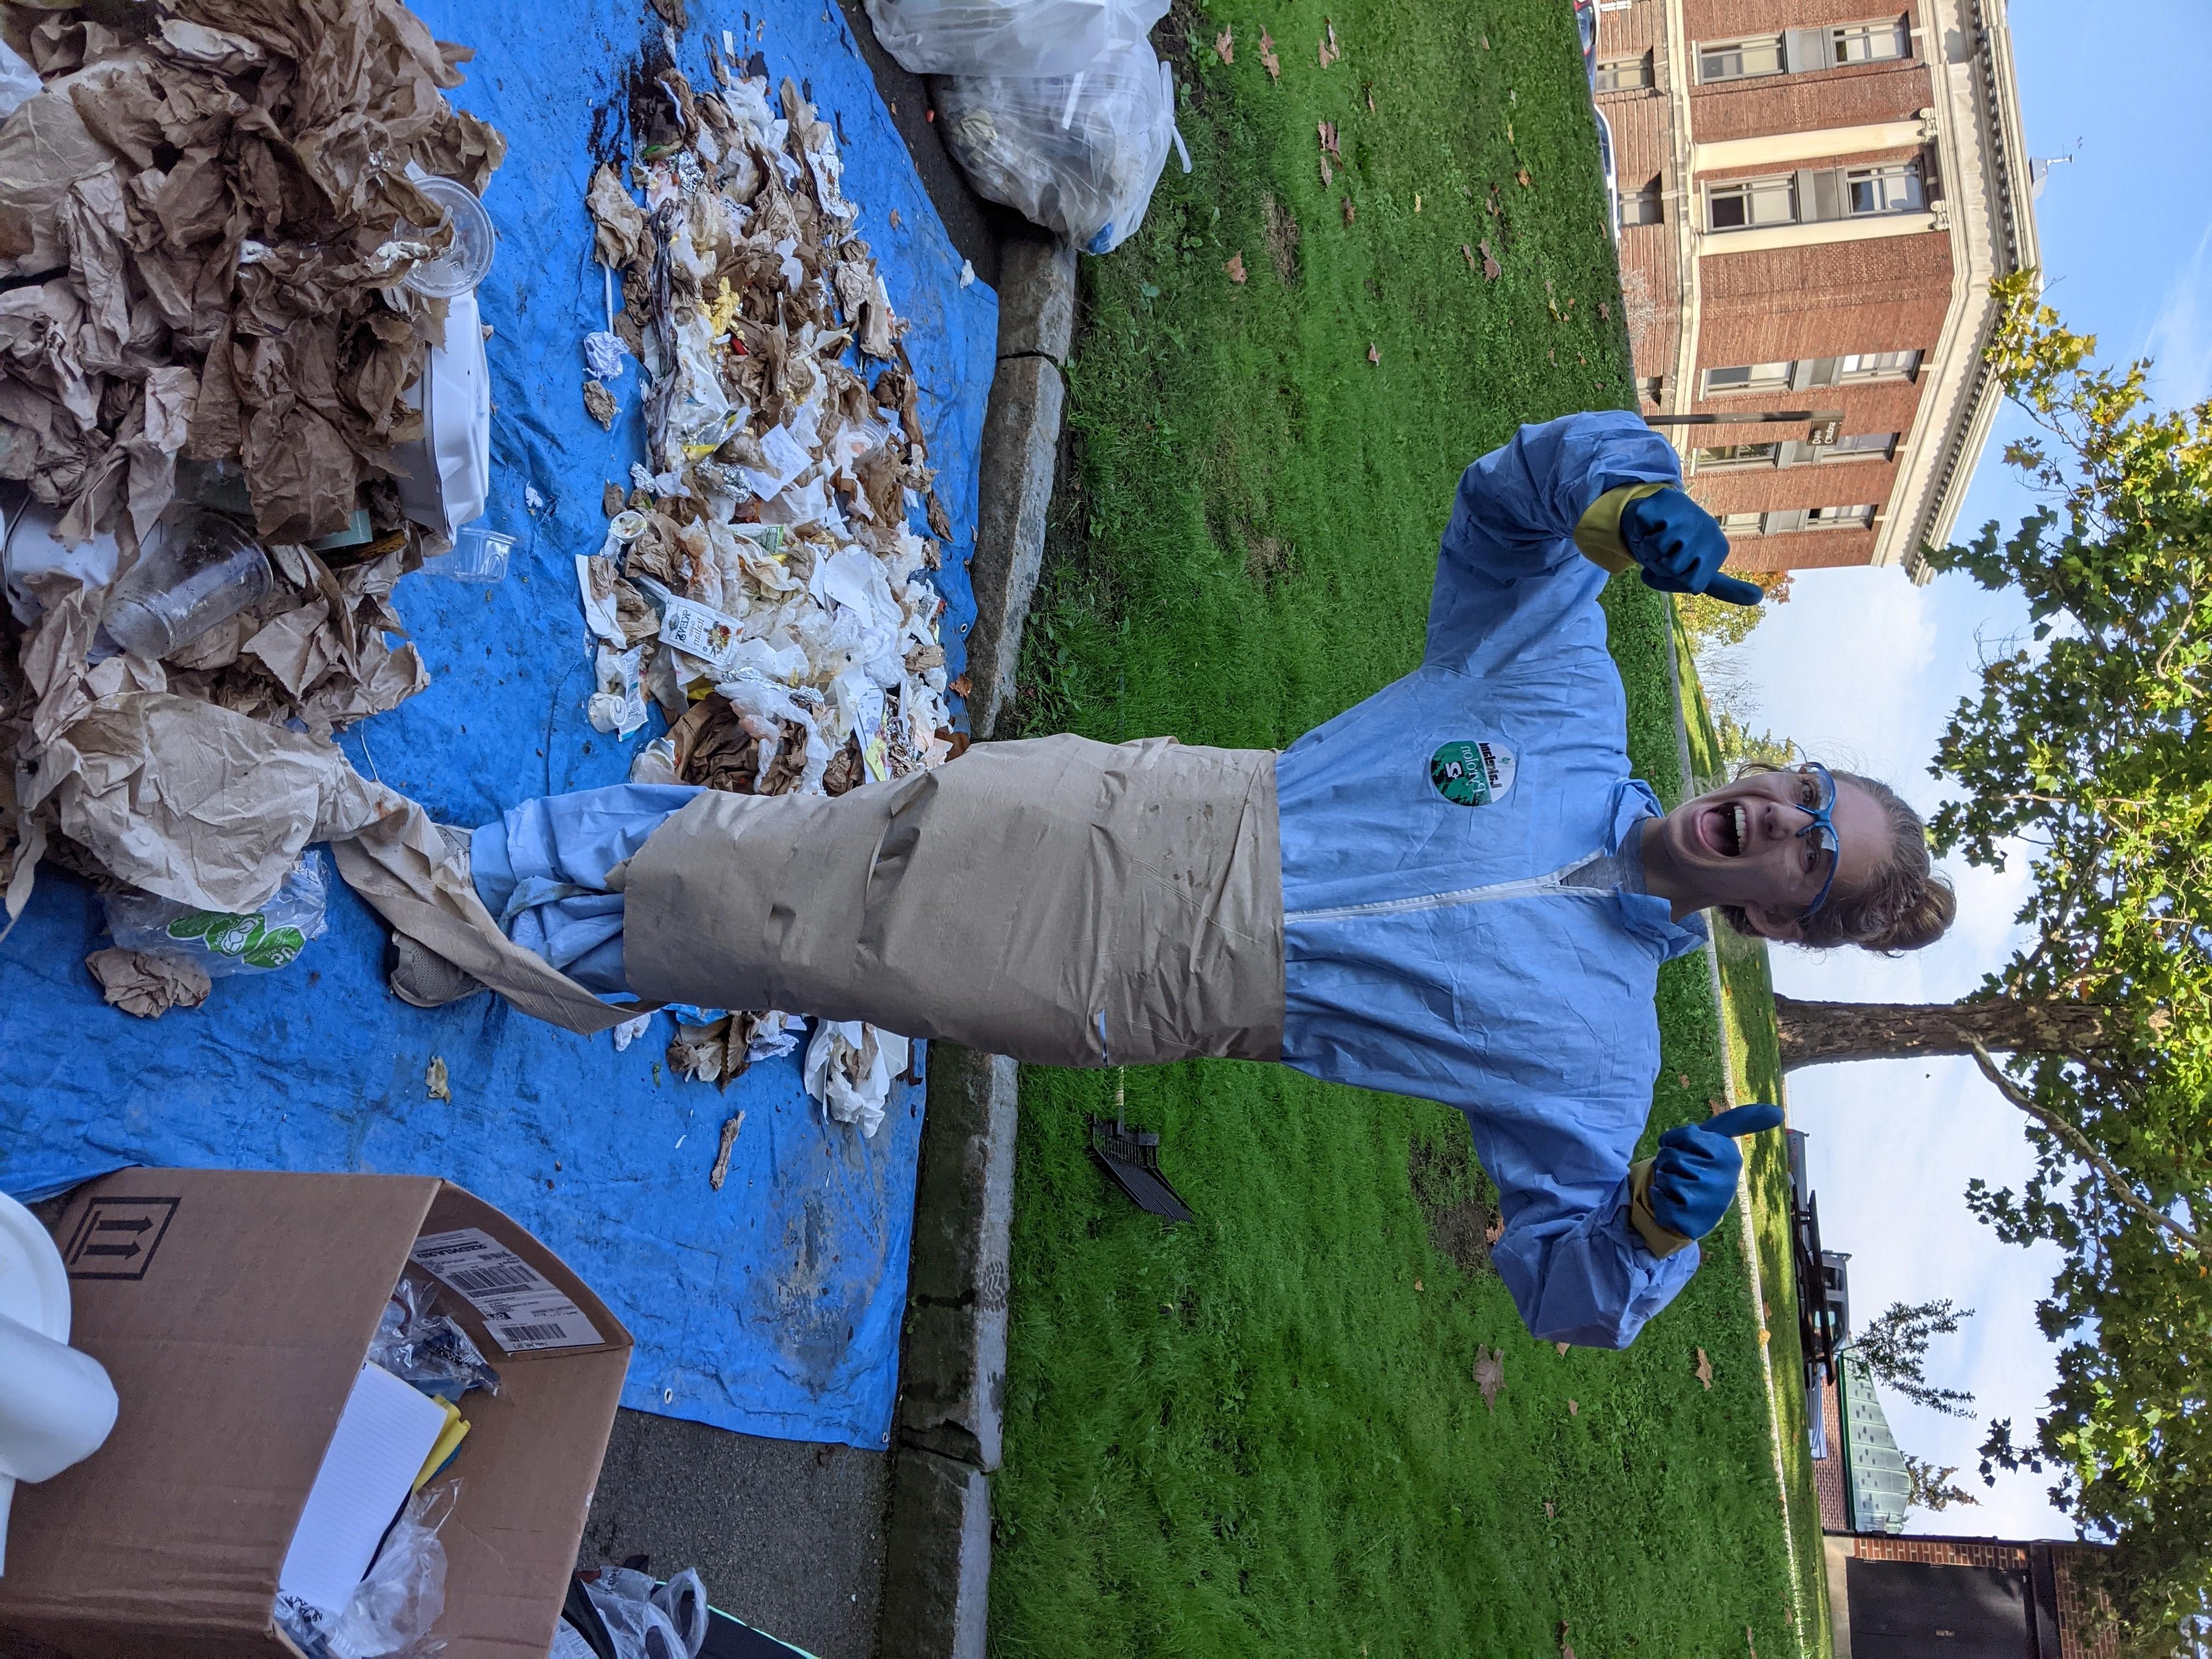 Club member wrapped in paper towels while conducting waste audit. Smiling, giving thumbs up